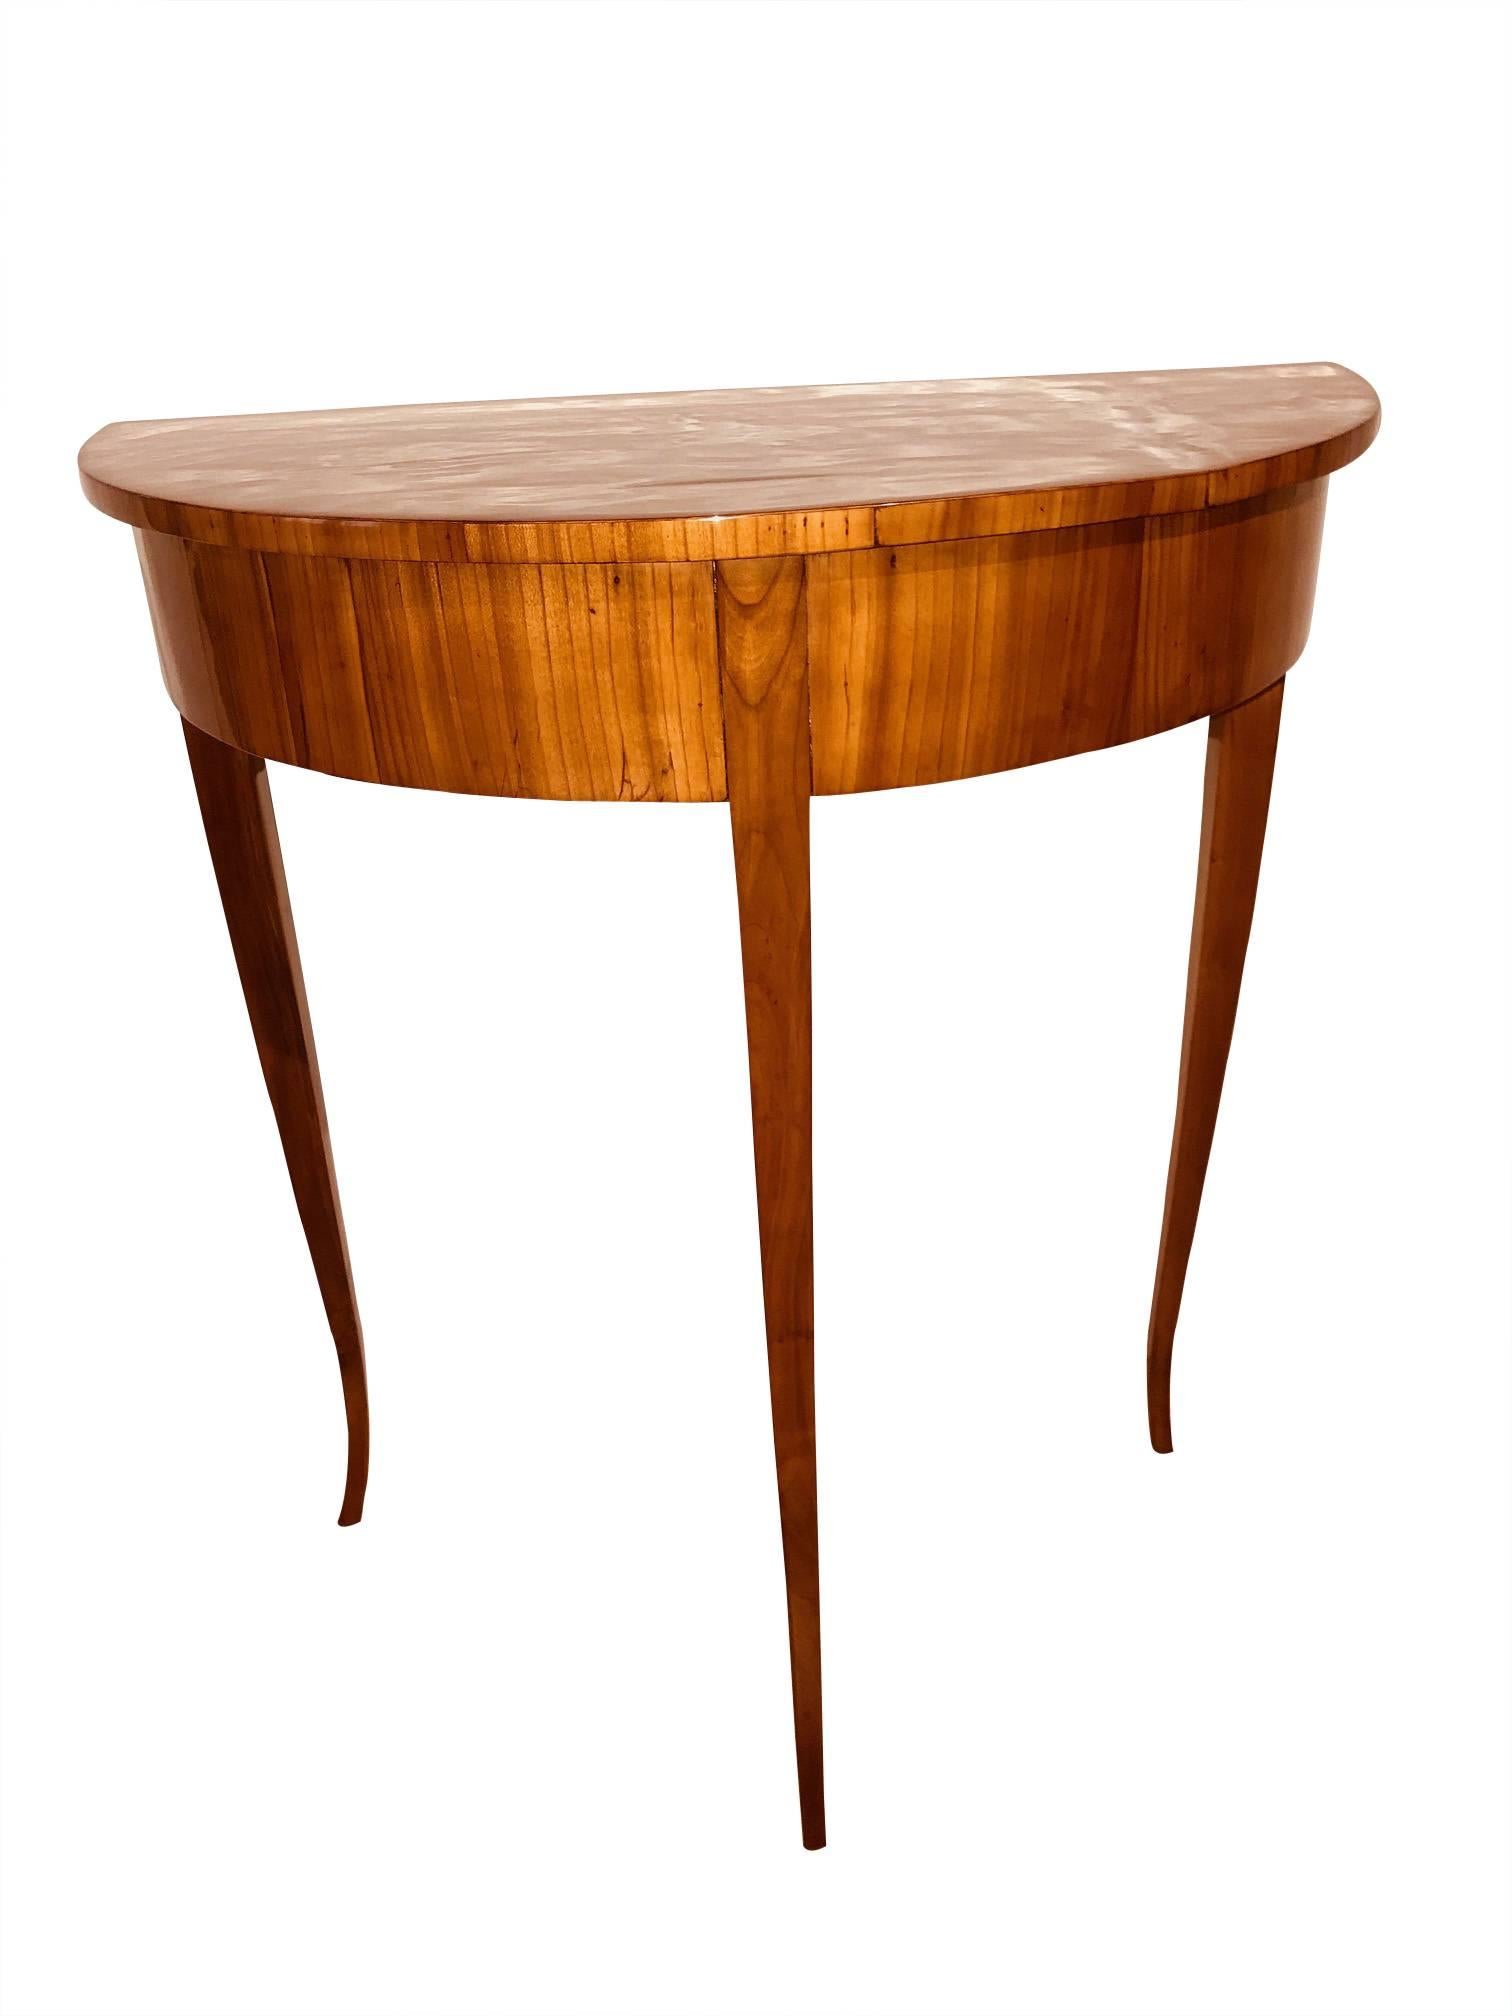 Very elegant, rare, small demilune (half-moon) side table made from cherry solid wood and veneer. Early Biedermeier, South Germany circa 1820. Beautifully light shaped conical legs. Hand-polished with shellac.